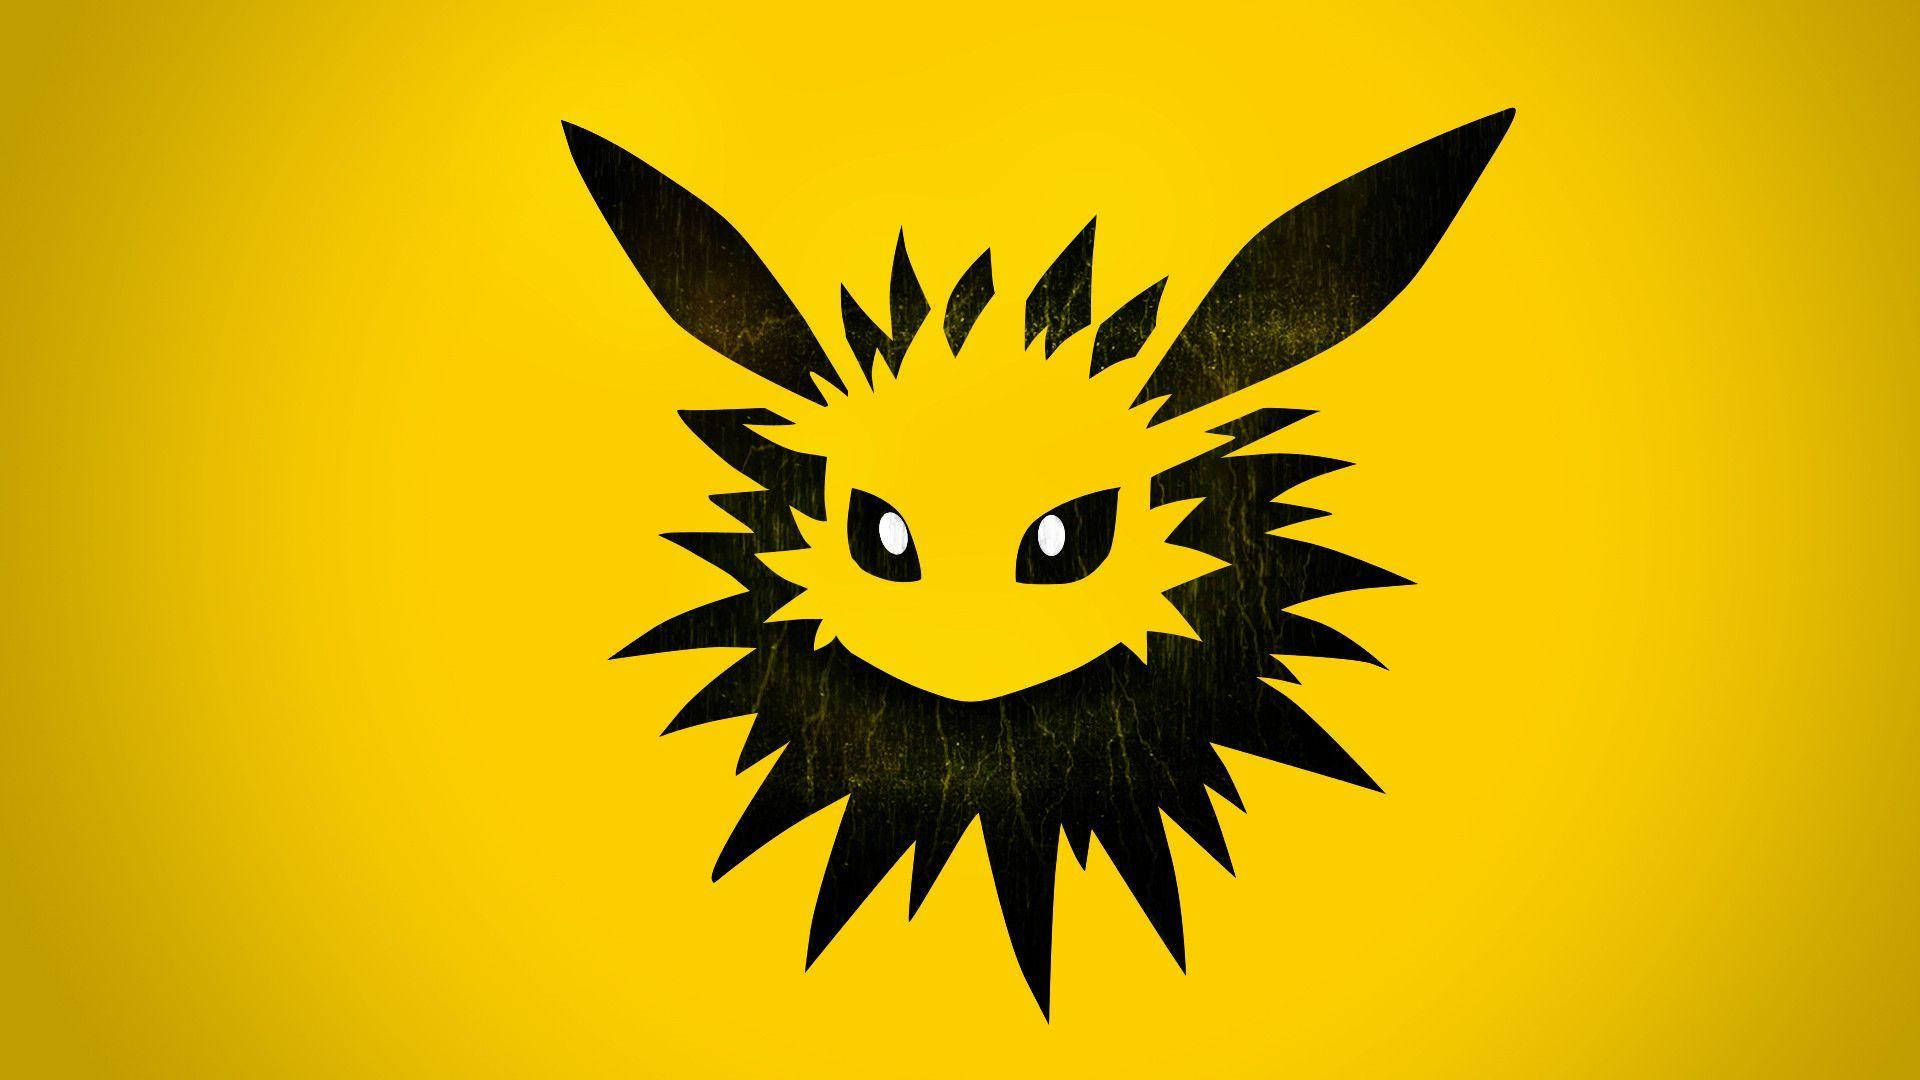 Black And Yellow Jolteon Picture